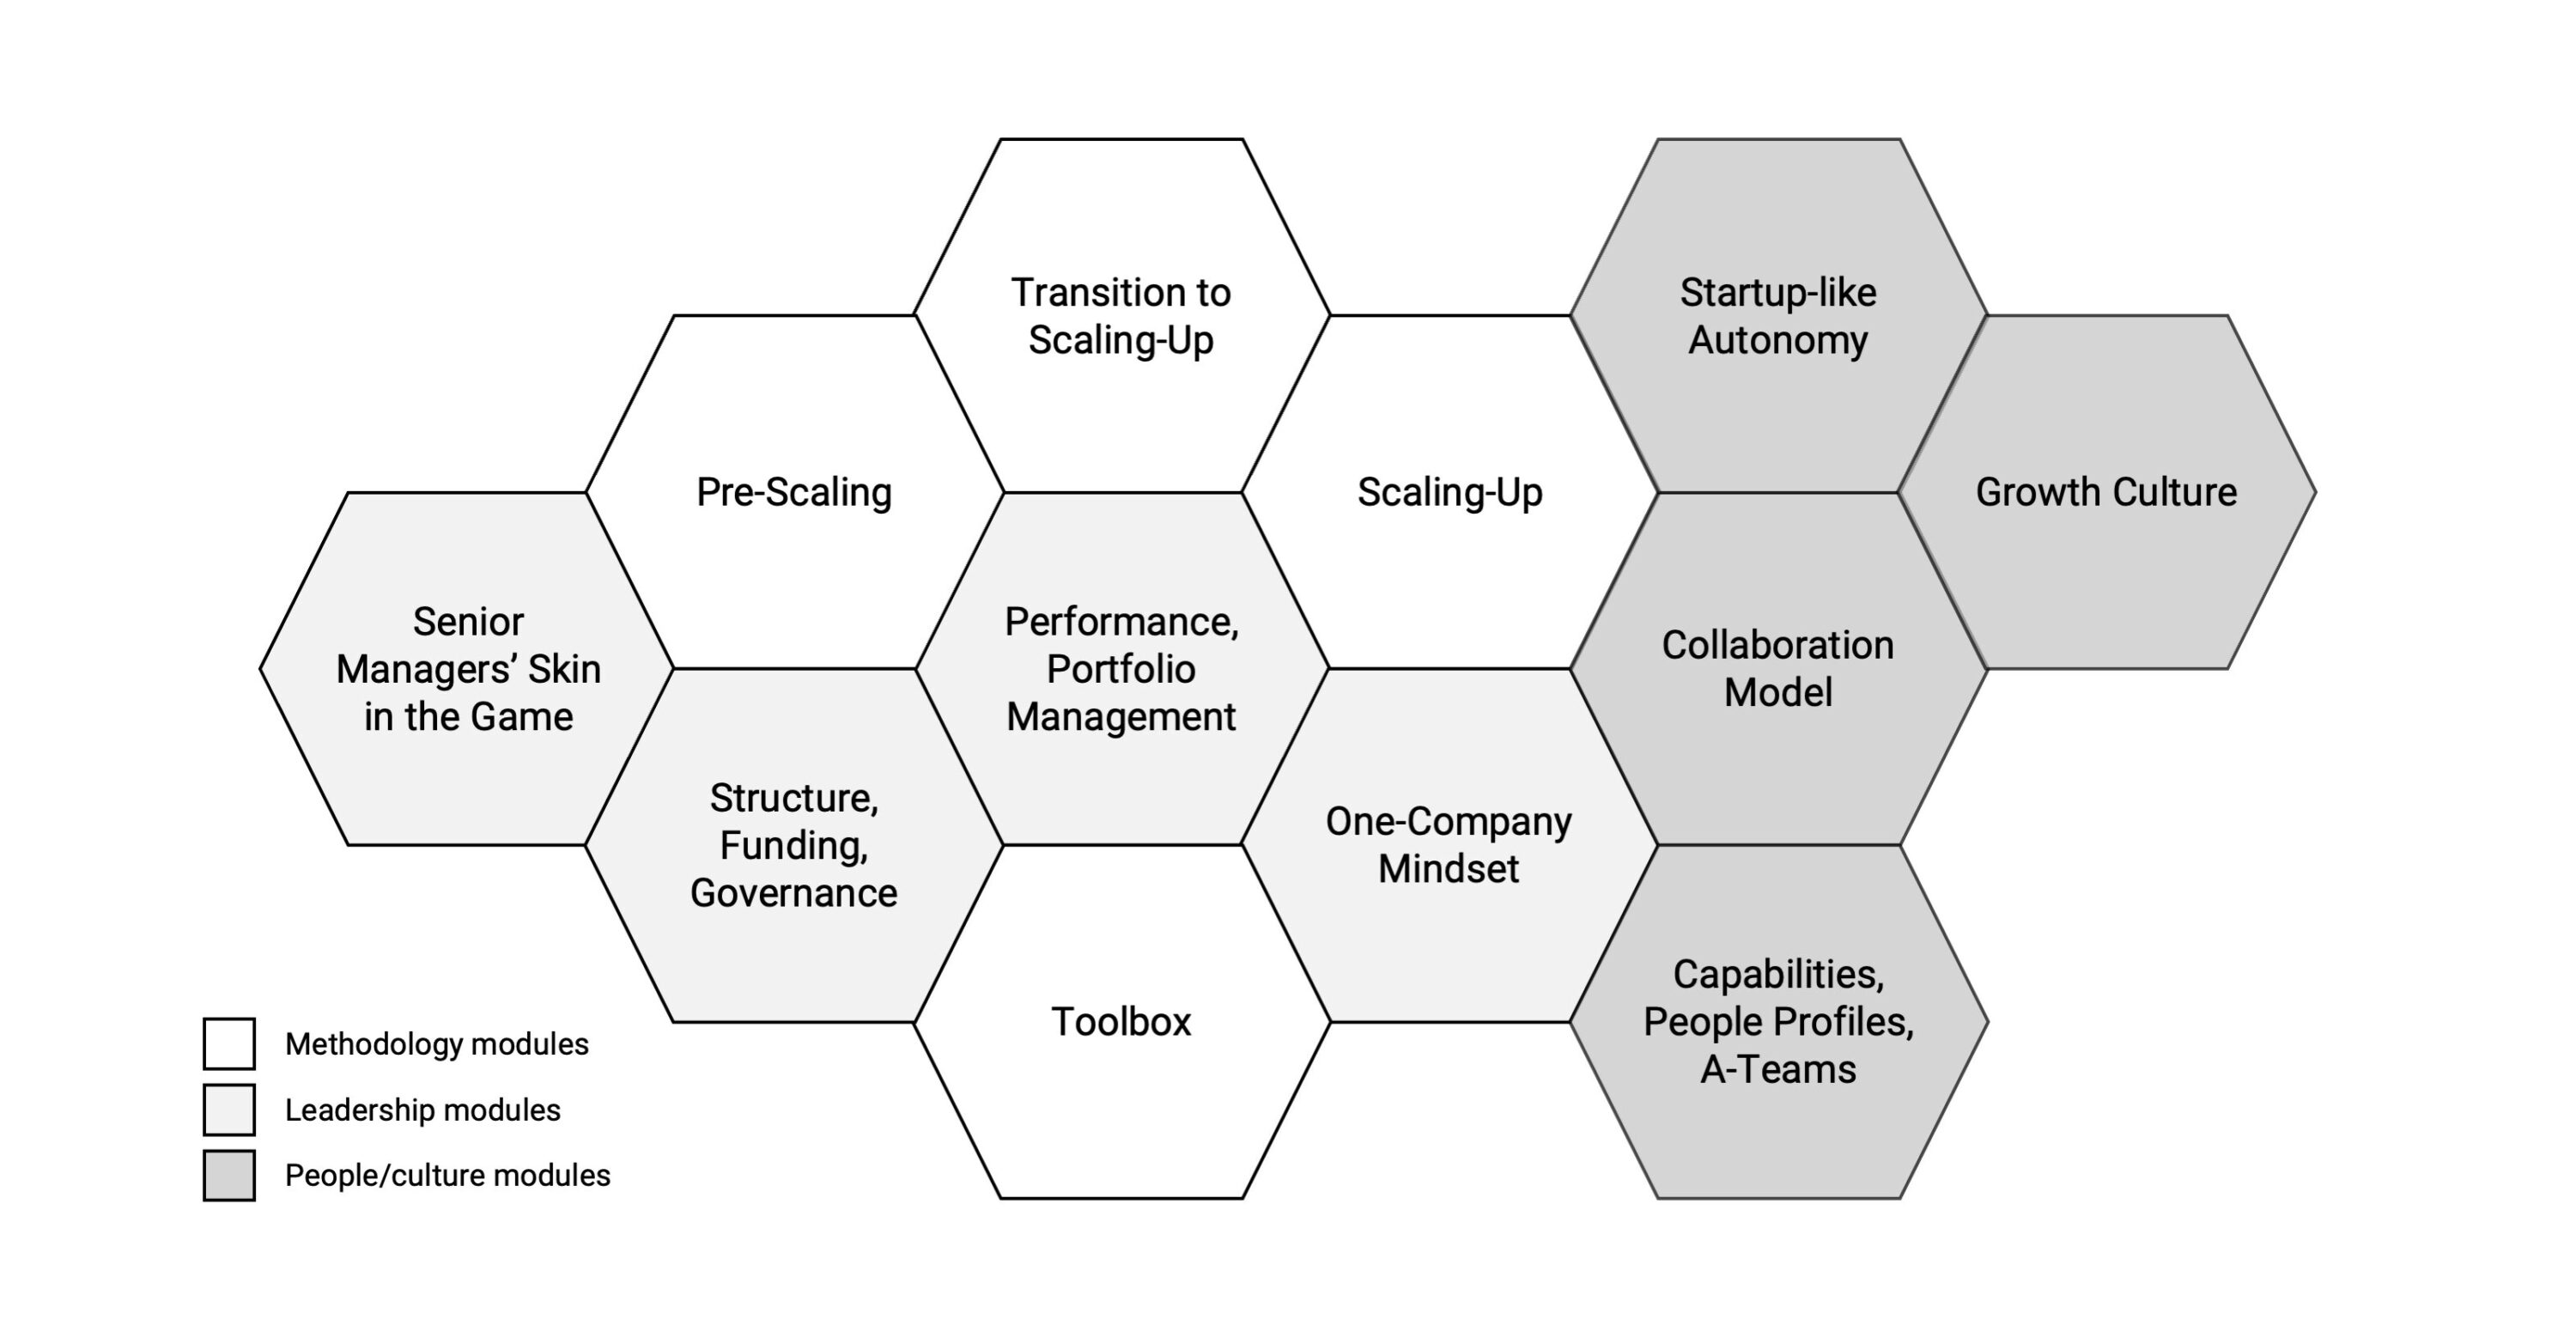 A honeycomb diagram outlining a business growth strategy with categories: Methodology, Leadership, and People/Culture. Each hexagon contains a specific module related to scaling up and growth.